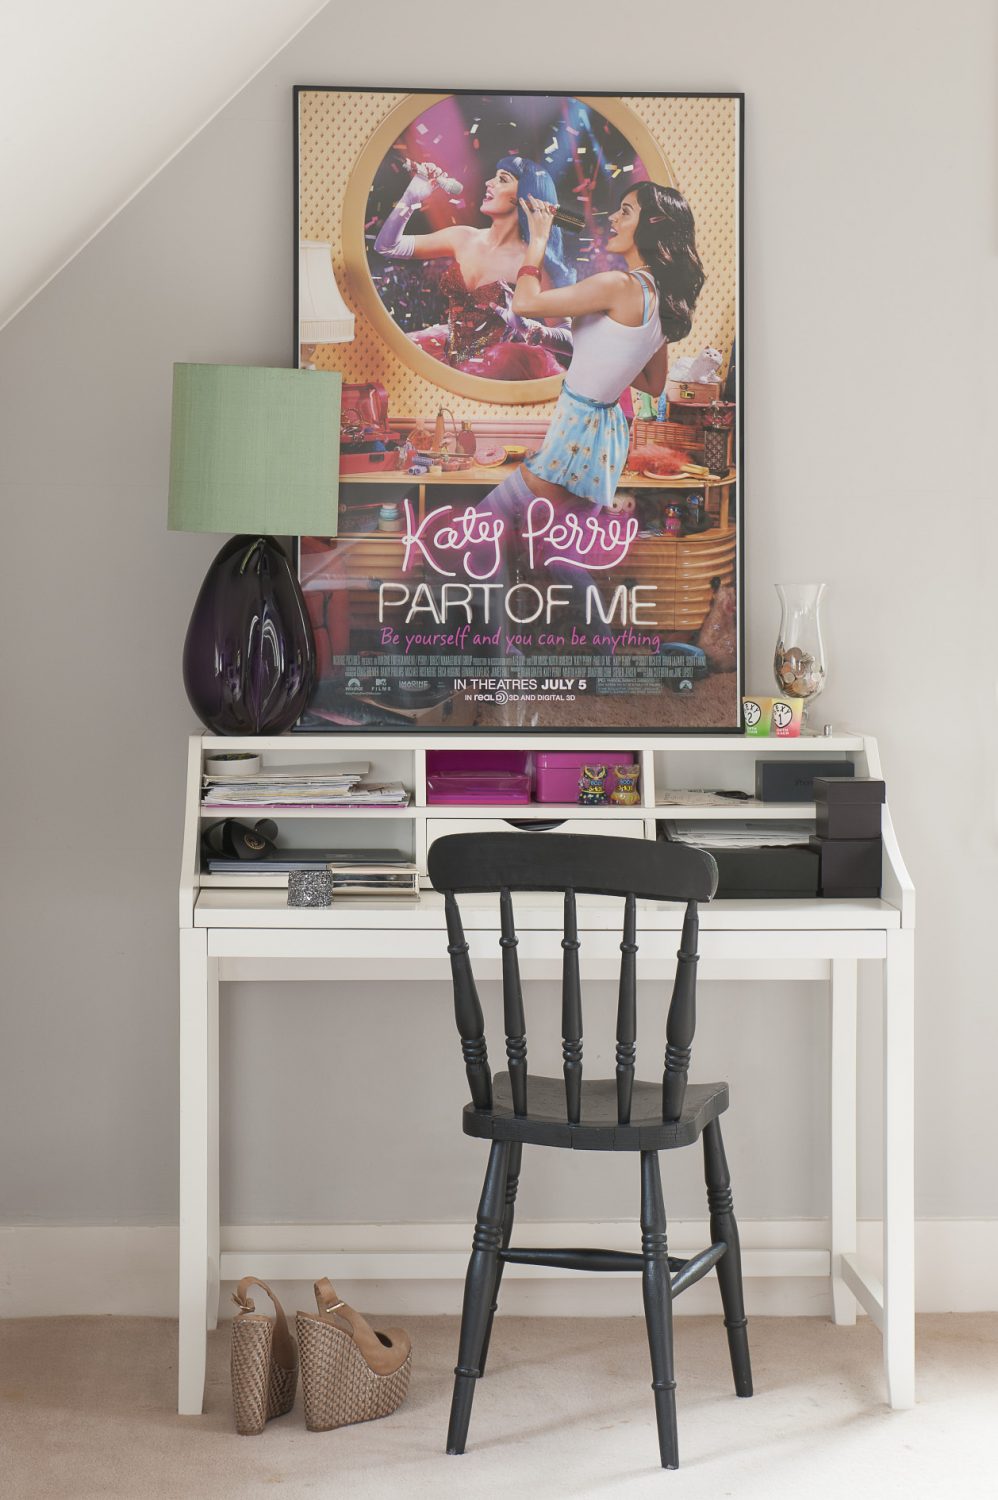 The decorative scheme is continued with the white desk and black chair, with pink accents in the accessories and poster. The lamp is by Porta Romana